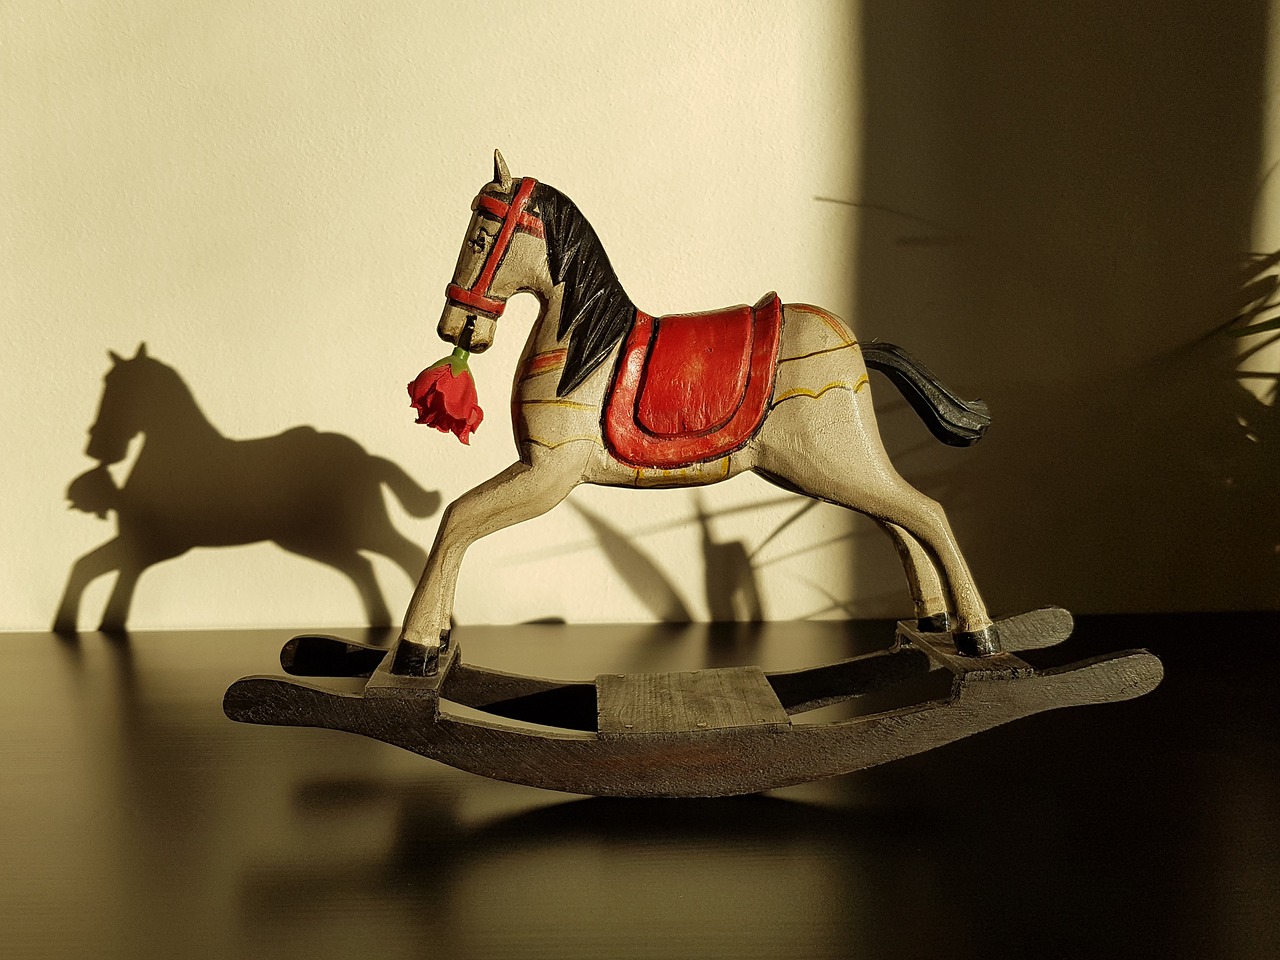 rocking horse toy statuette free photo